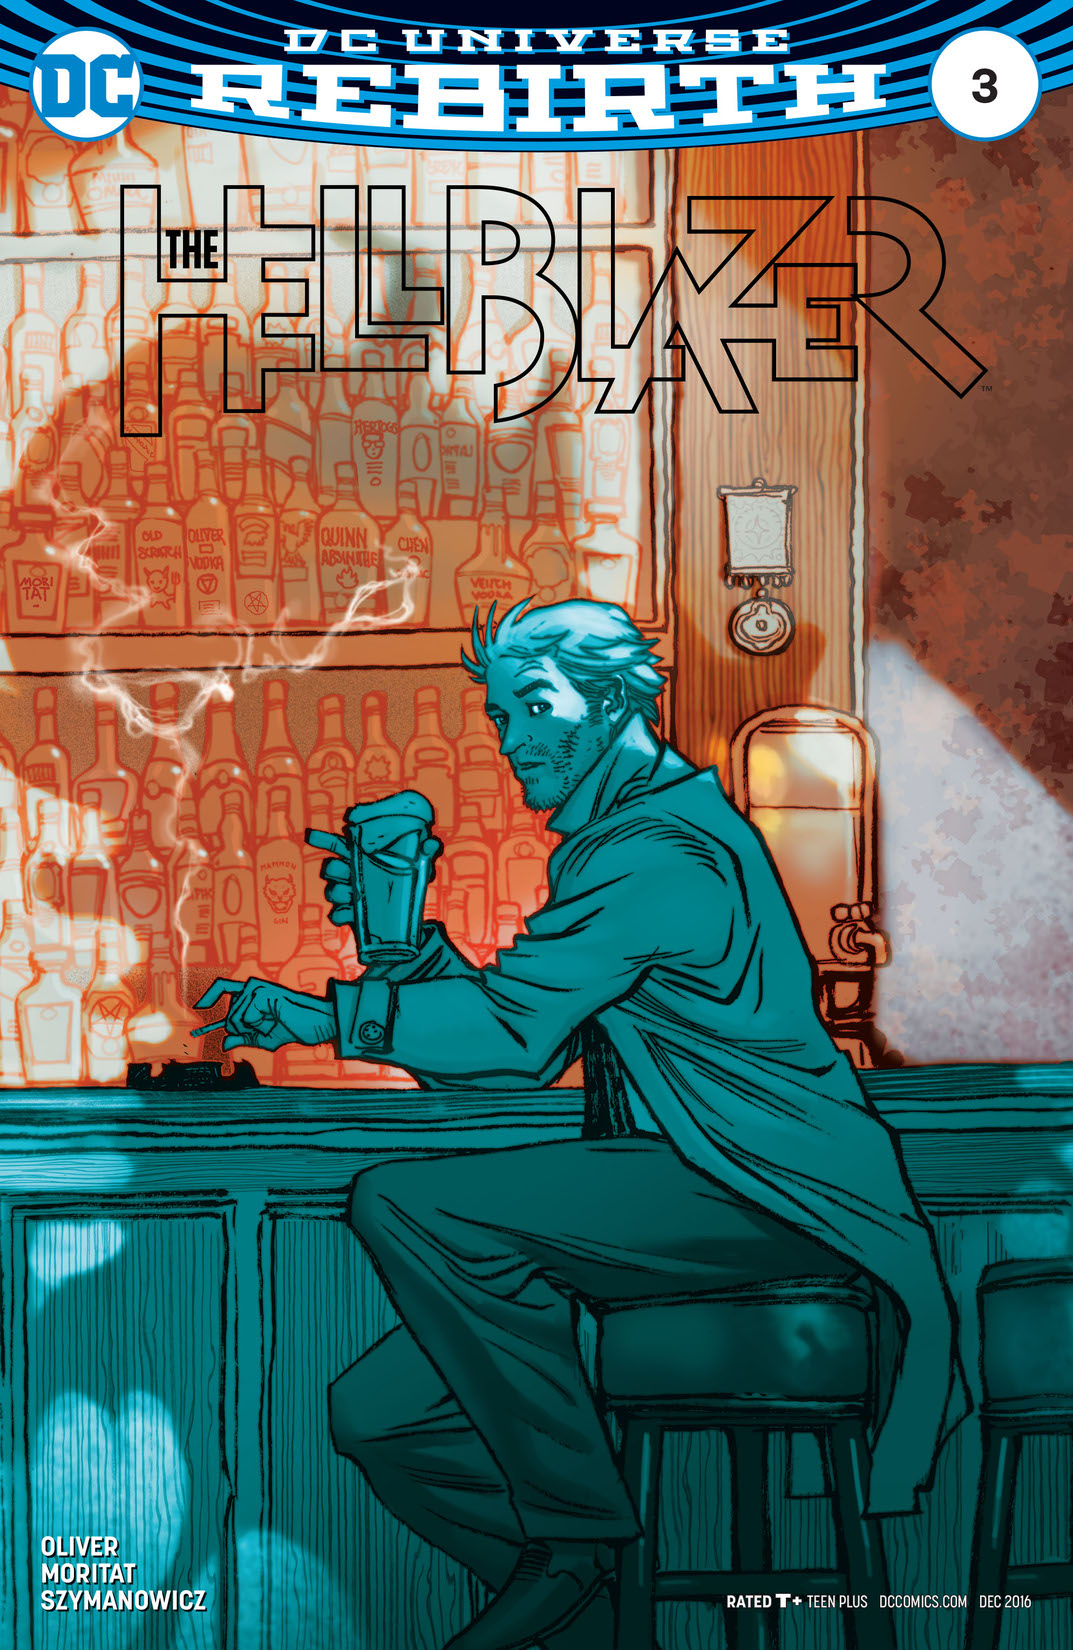 The Hellblazer #3 preview images